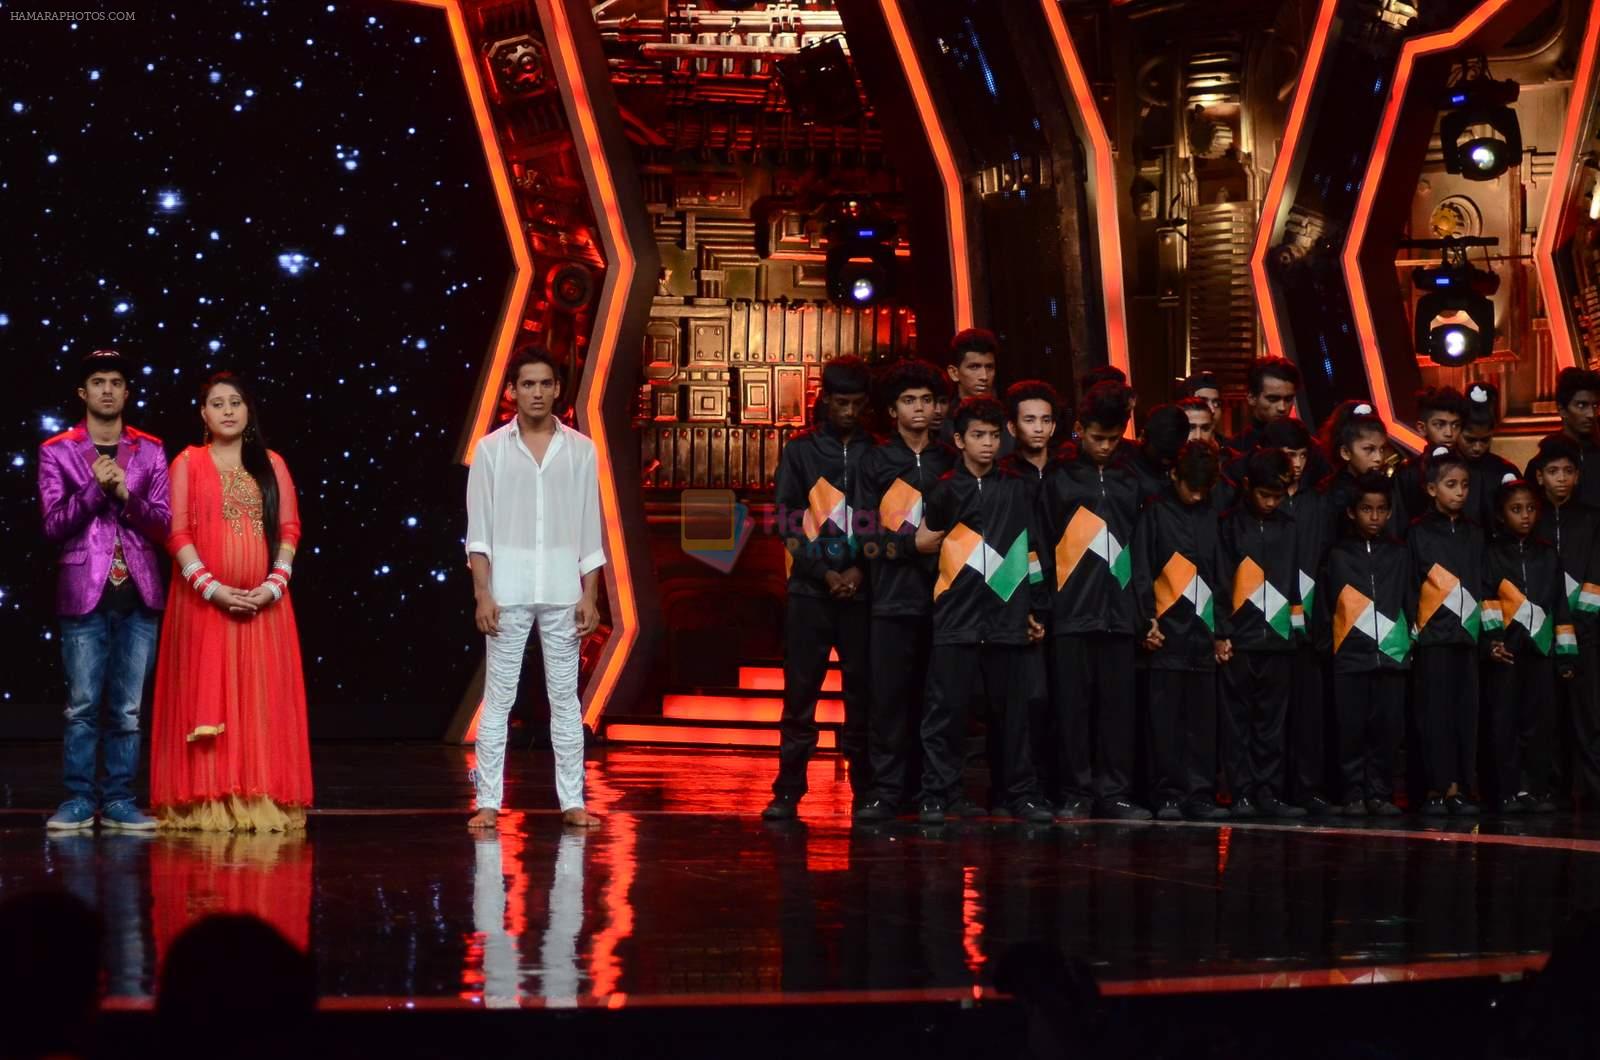 at IGT grand finale in Filmcity, Mumbai on 27th June 2015